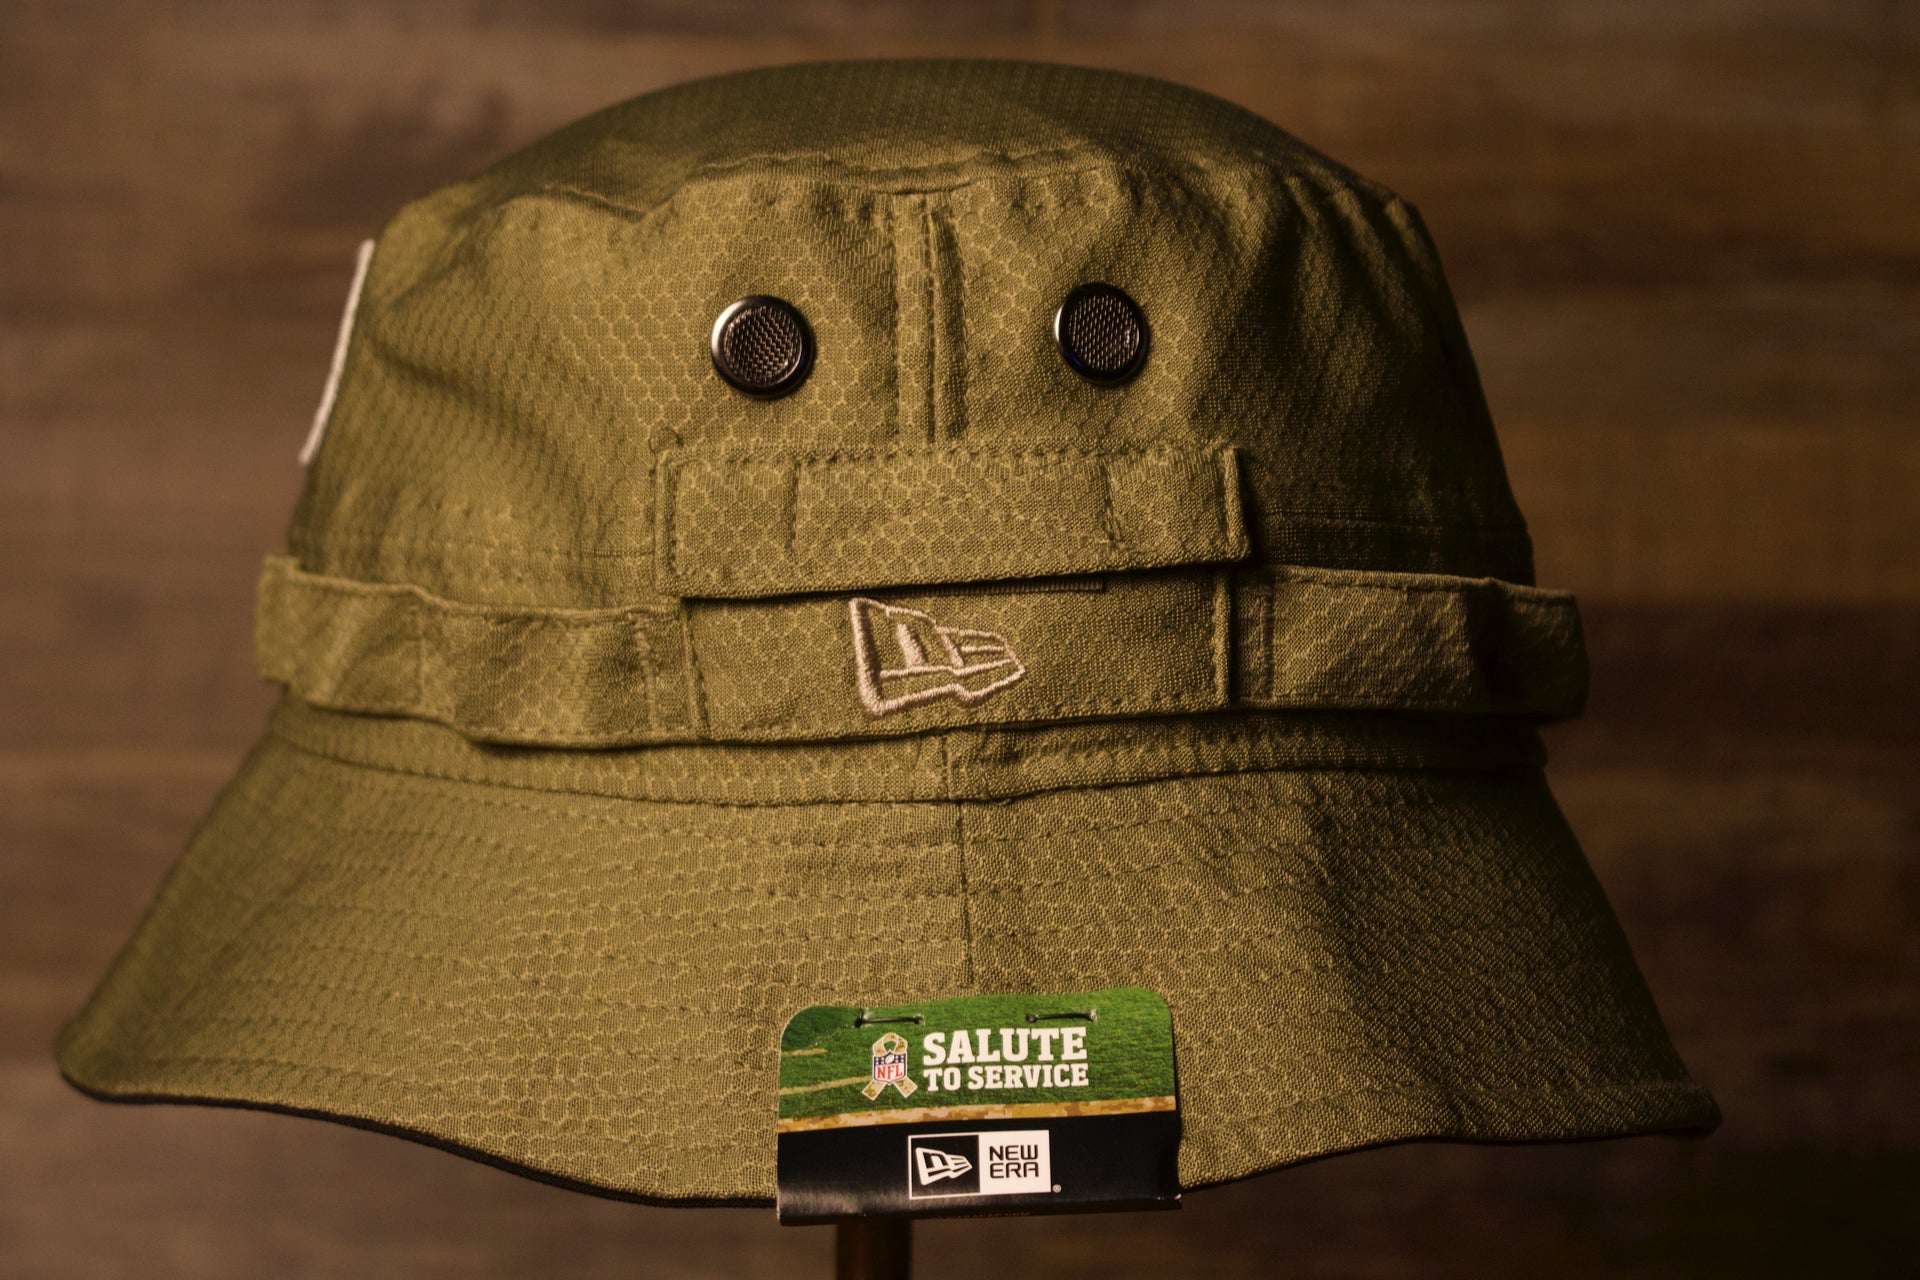 Steelers Bucket Hat | Pitsburgh Steelers 2019 Salute To Service Boonie Bucket Hat | Olive Green | OSFM the wearers left side is a plain olive green side with the new era logo on it